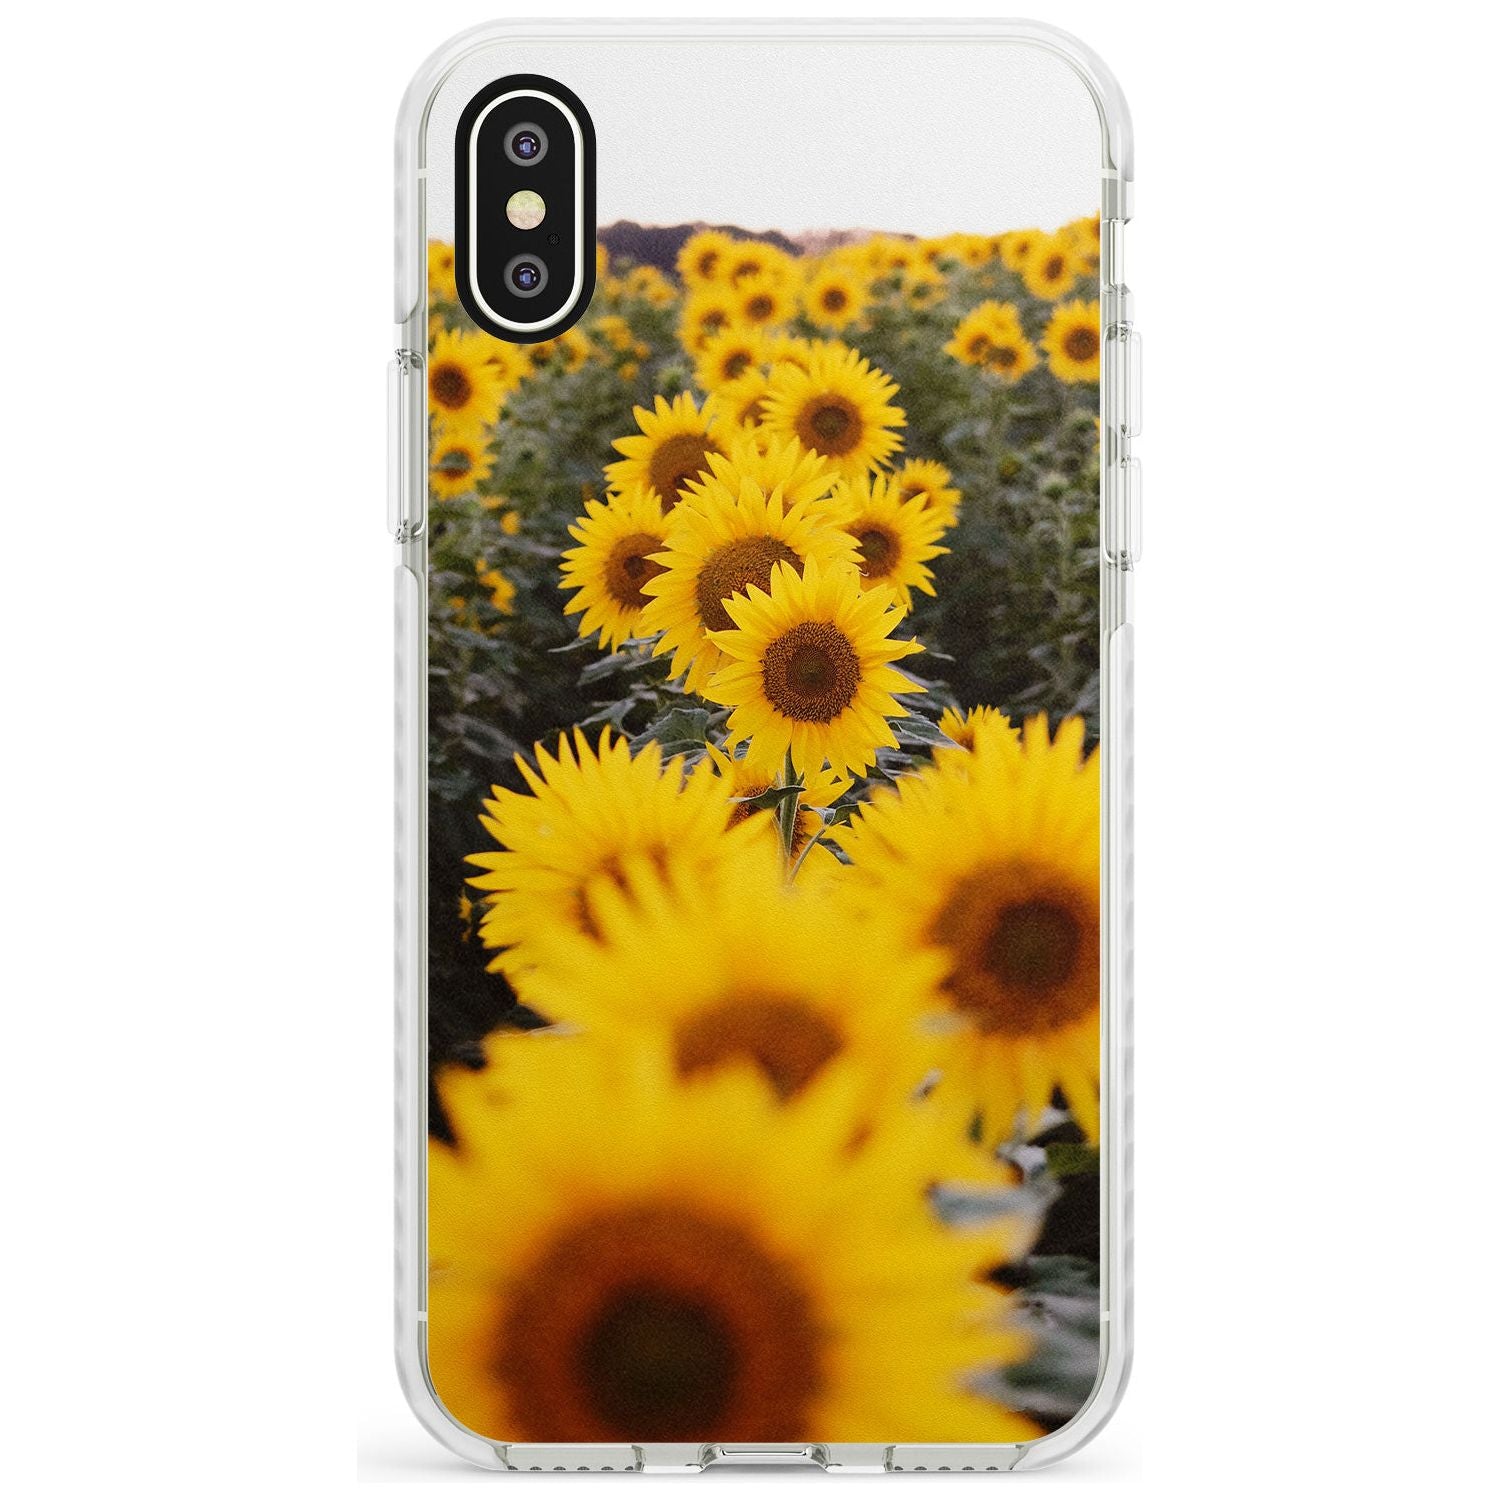 Sunflower Field Photograph Impact Phone Case for iPhone X XS Max XR